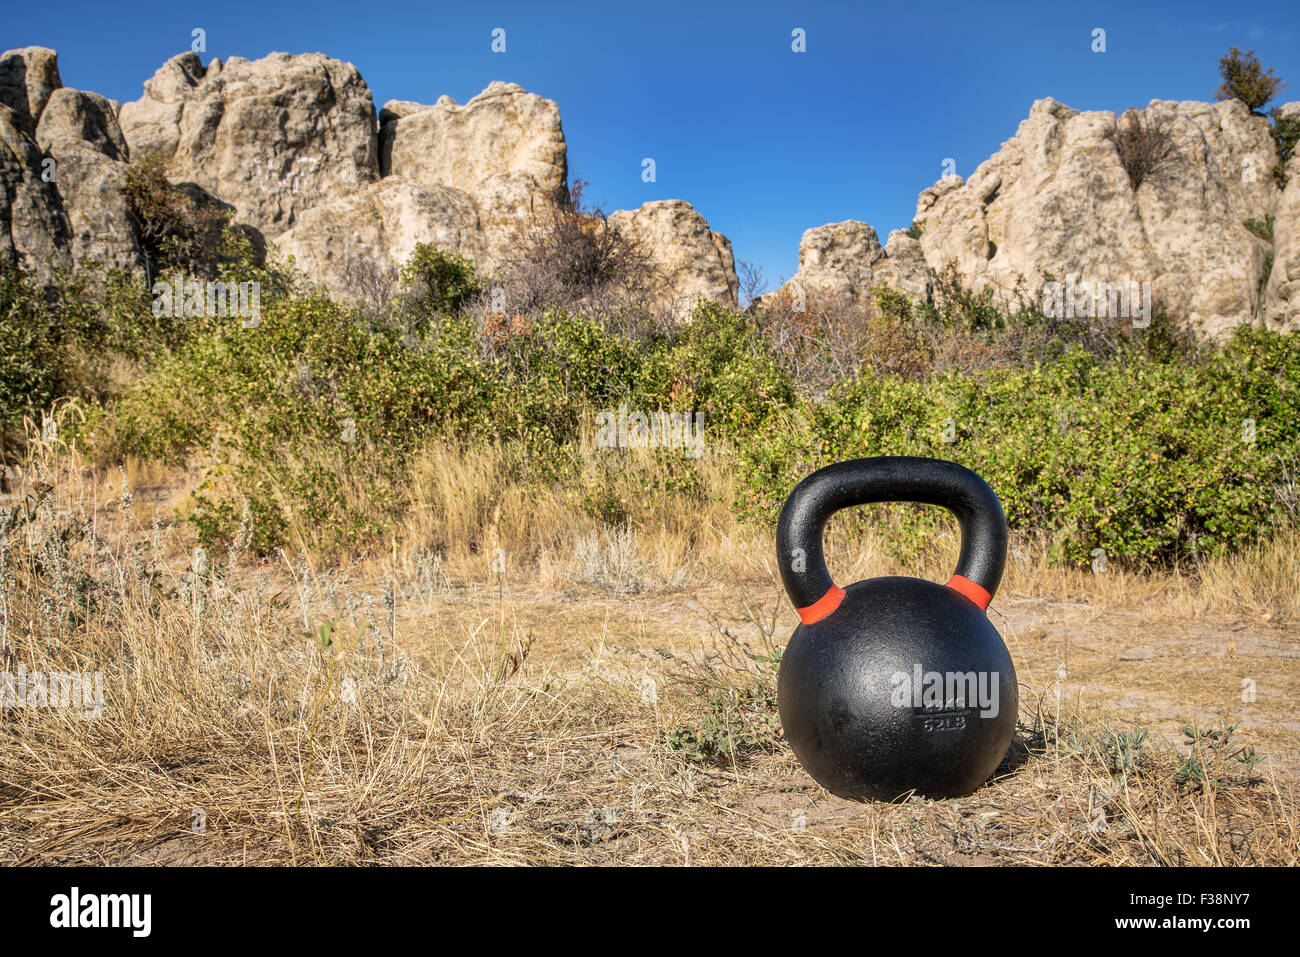 outdoor fitness concept - heavy iron kettlebell with rock formations in background Stock Photo